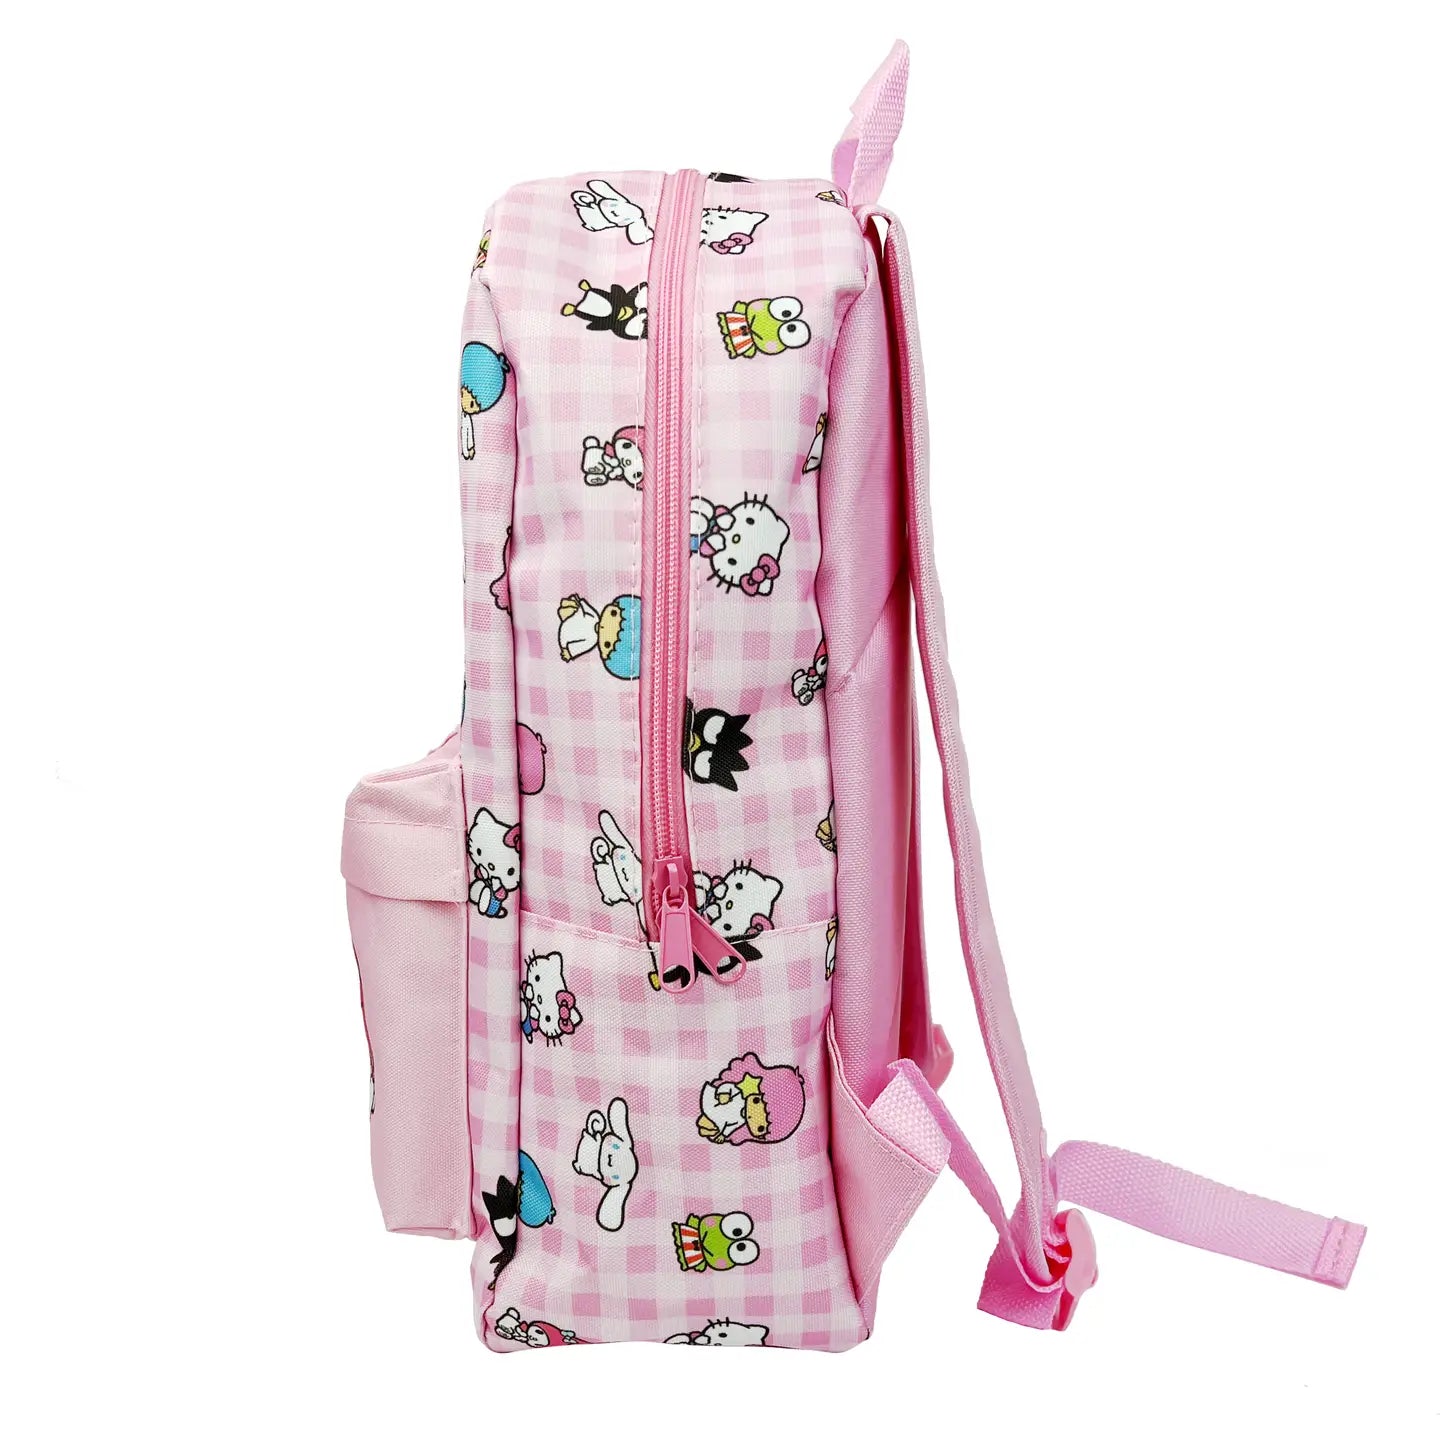 This Hello Kitty backpack is the perfect size for carrying around your stationery, books and other personal belongings! The bag has an all over print with Kitty and her friends.